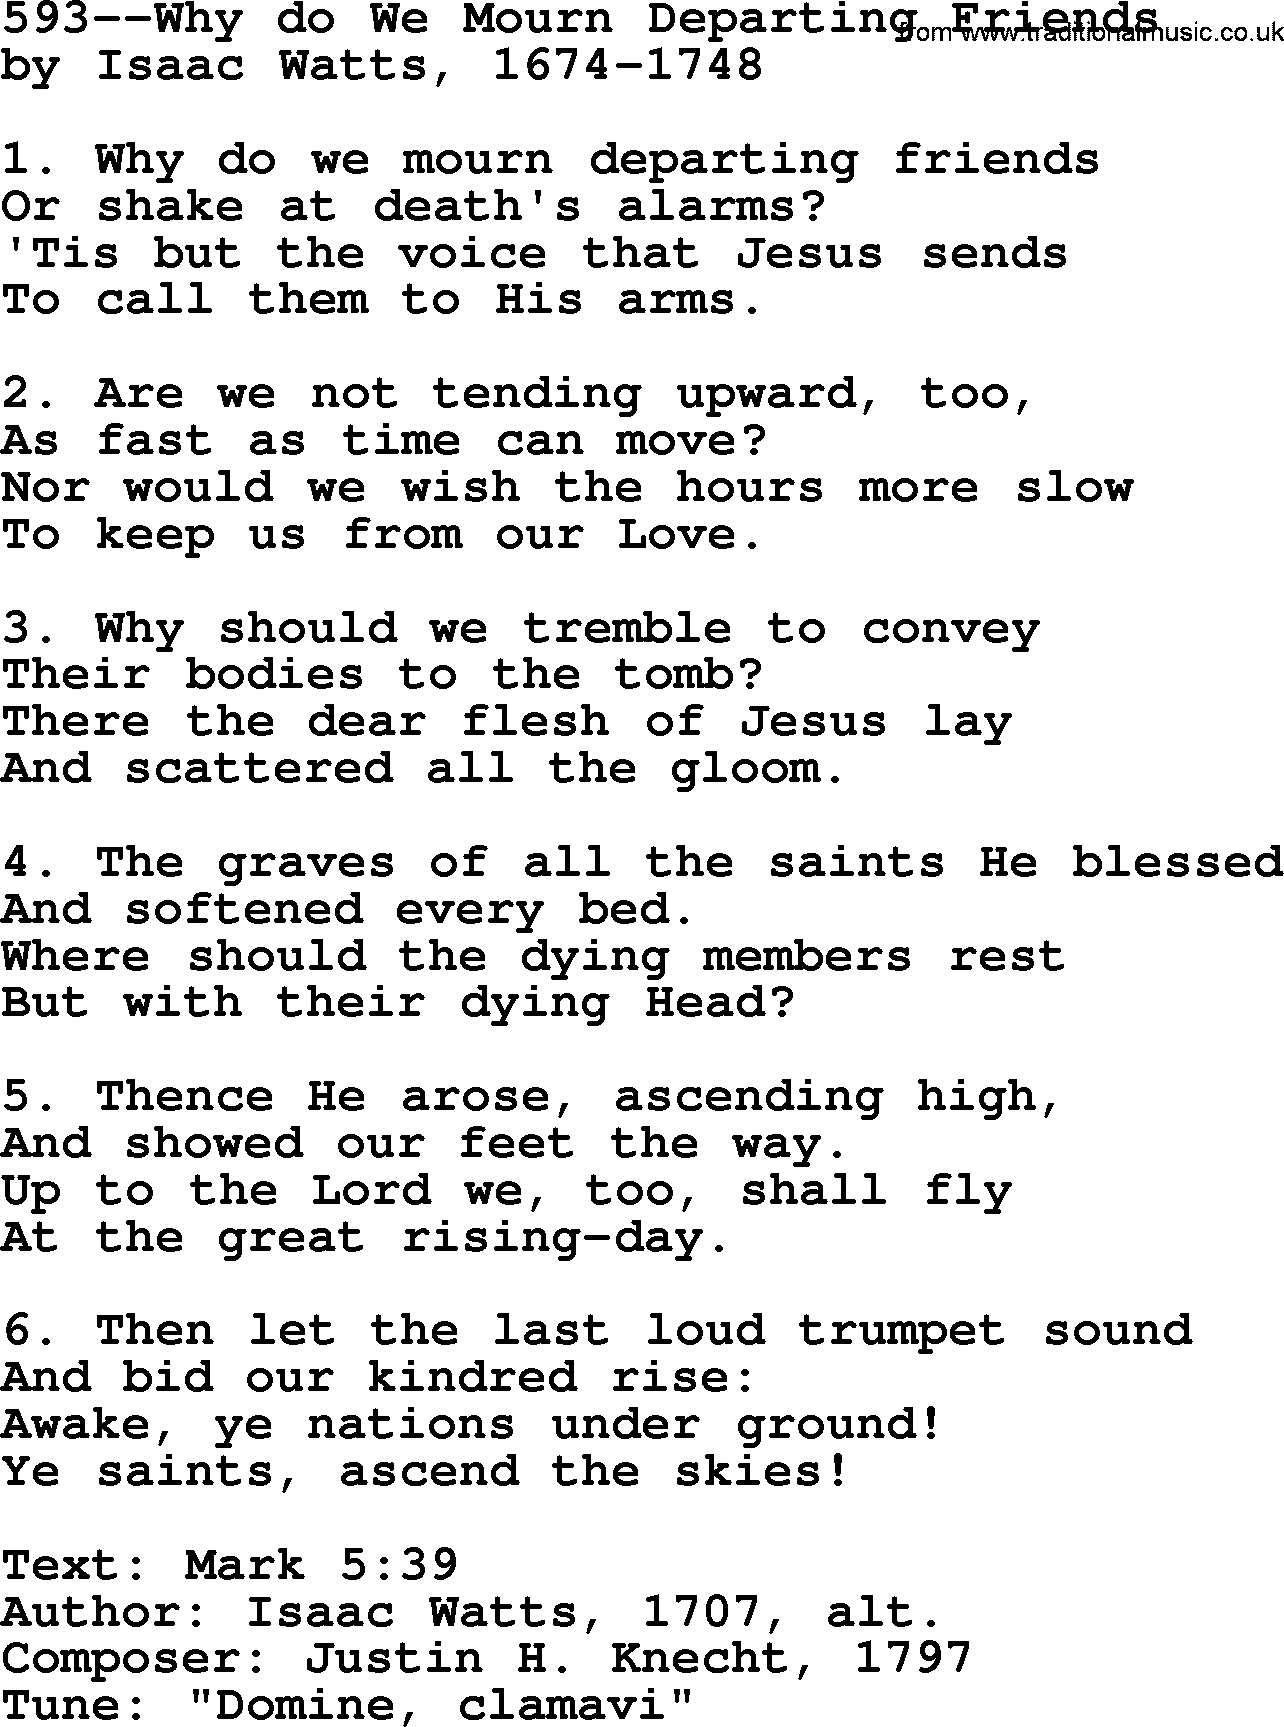 Lutheran Hymn: 593--Why do We Mourn Departing Friends.txt lyrics with PDF